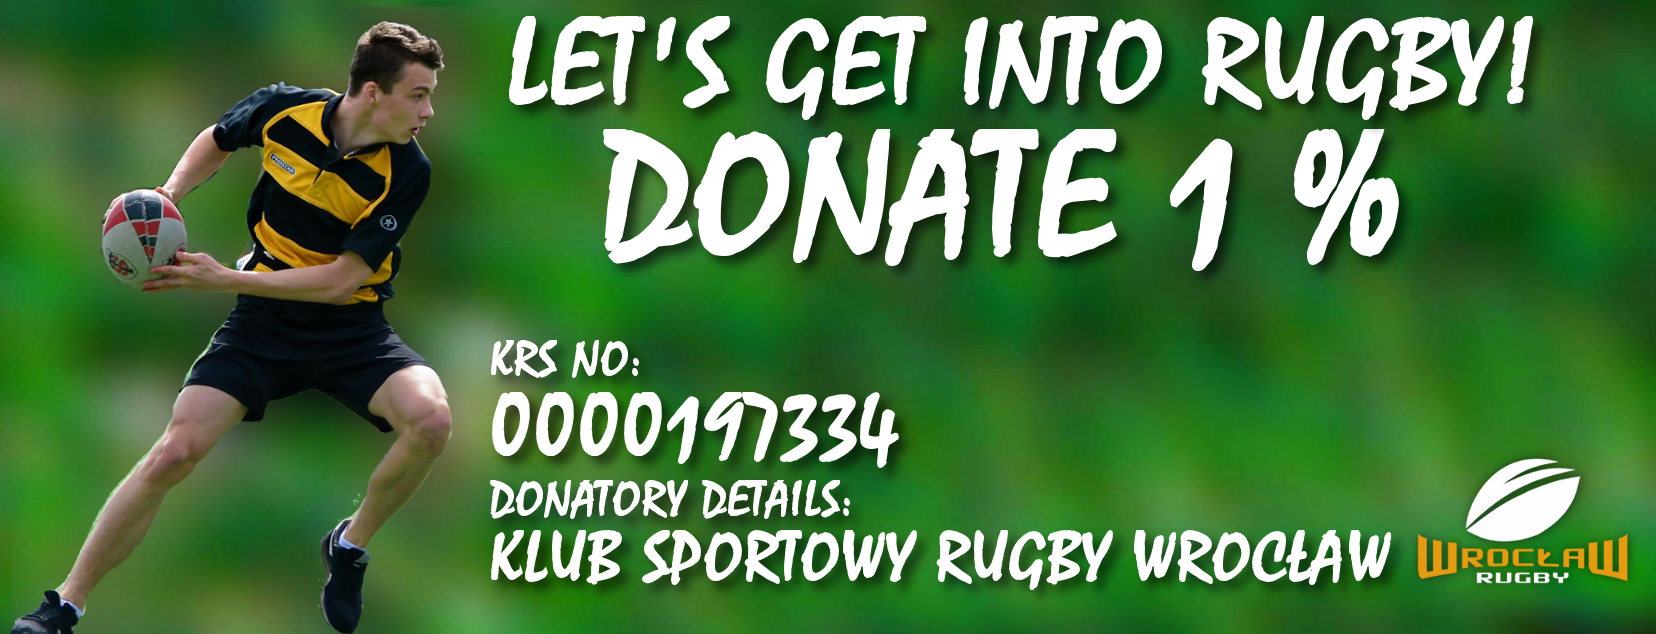 Help us getting into rugby! Please donate 1%!